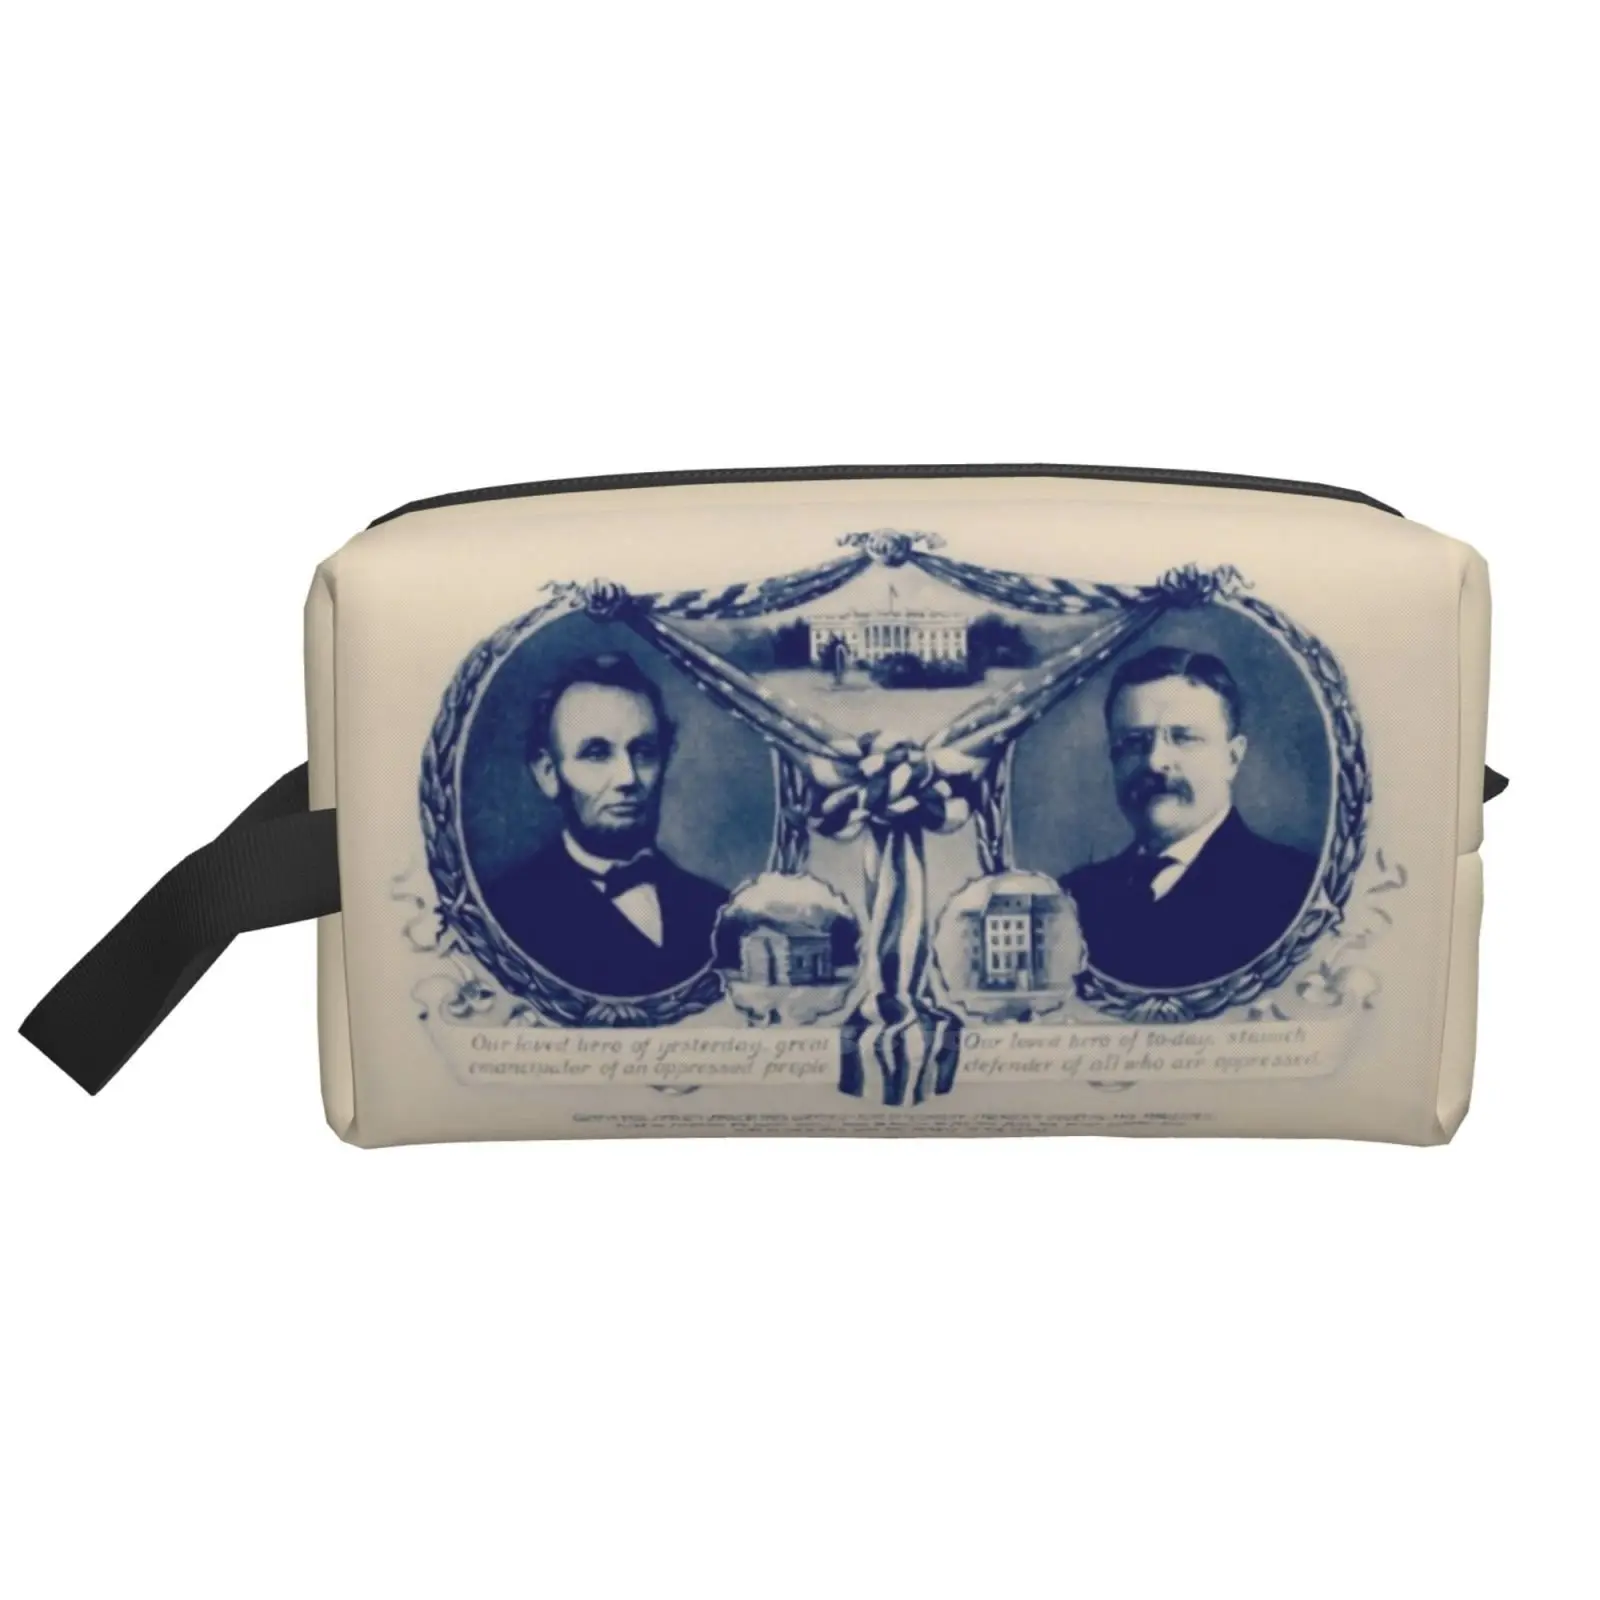 

Abraham Lincoln And Theodore Roosevelt - 1906 Digital Storage Bag Travel Bag Storge Bags Abraham Lincoln President Lincoln